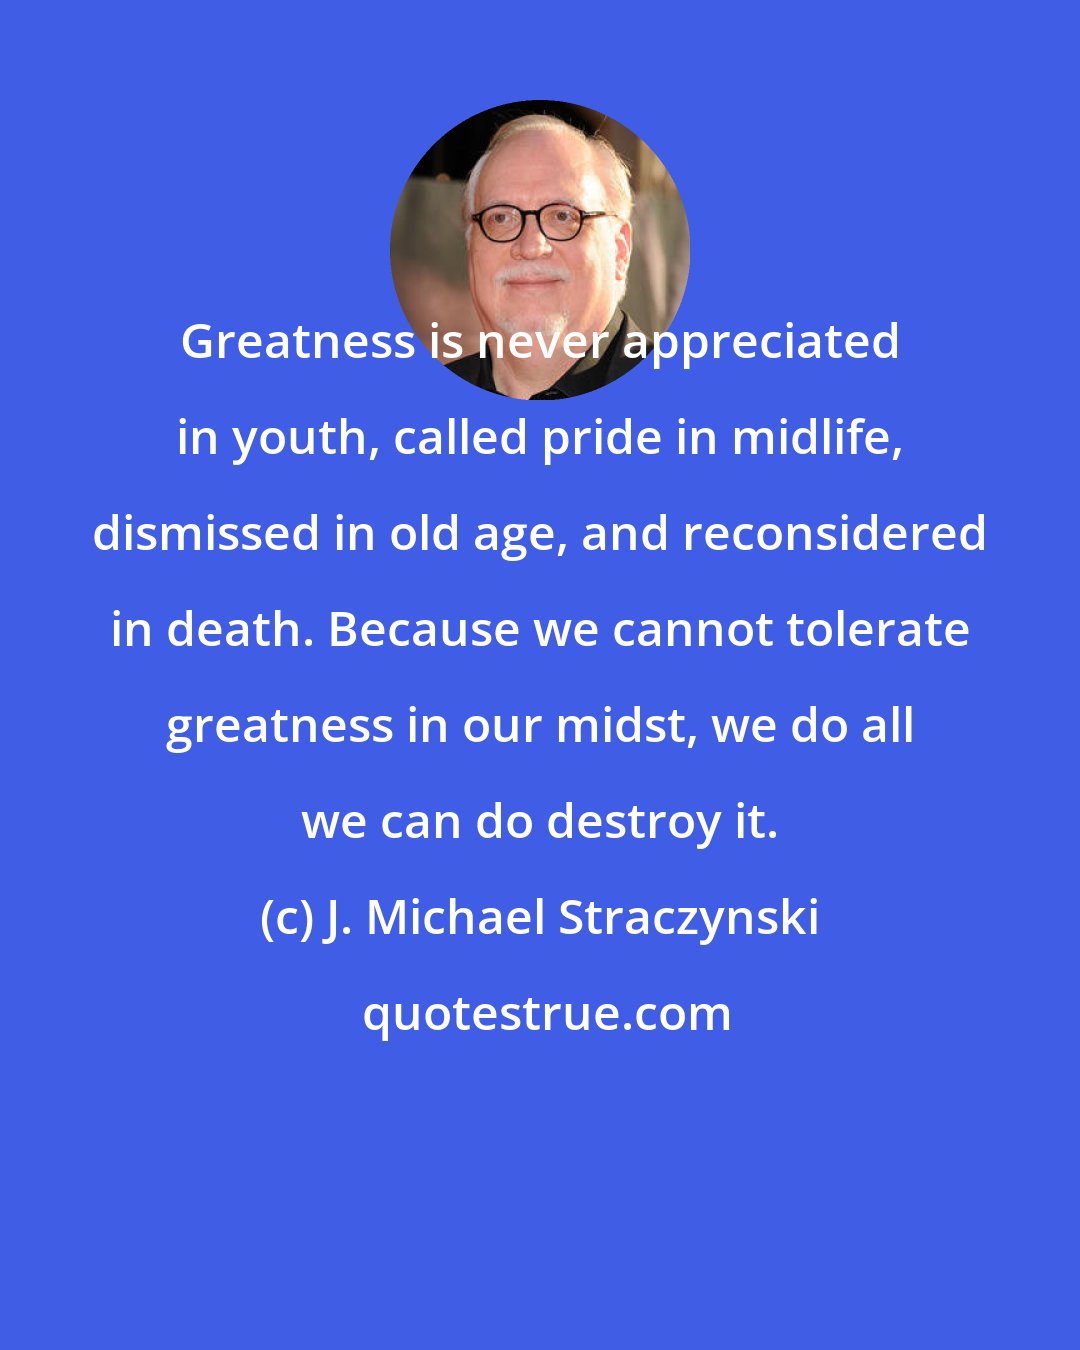 J. Michael Straczynski: Greatness is never appreciated in youth, called pride in midlife, dismissed in old age, and reconsidered in death. Because we cannot tolerate greatness in our midst, we do all we can do destroy it.